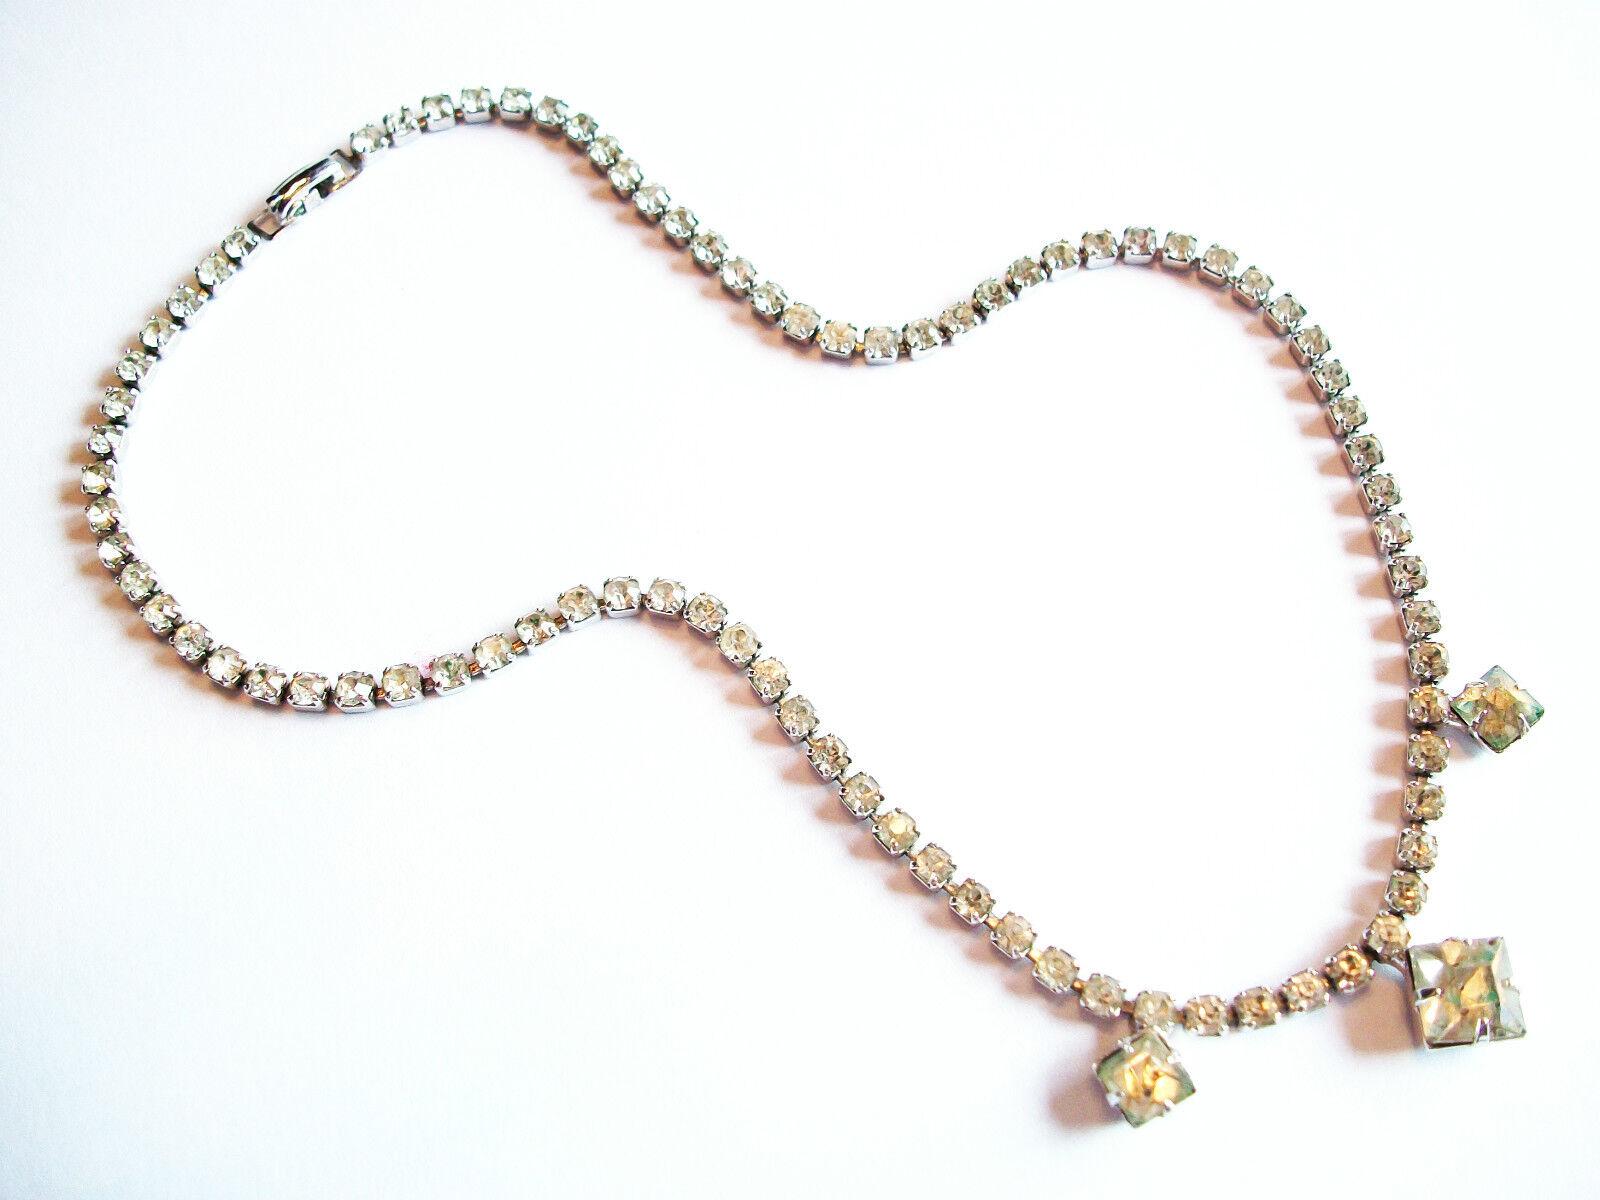 Art Deco Rhinestone Necklace - Unsigned - Circa 1950's In Good Condition For Sale In Chatham, CA